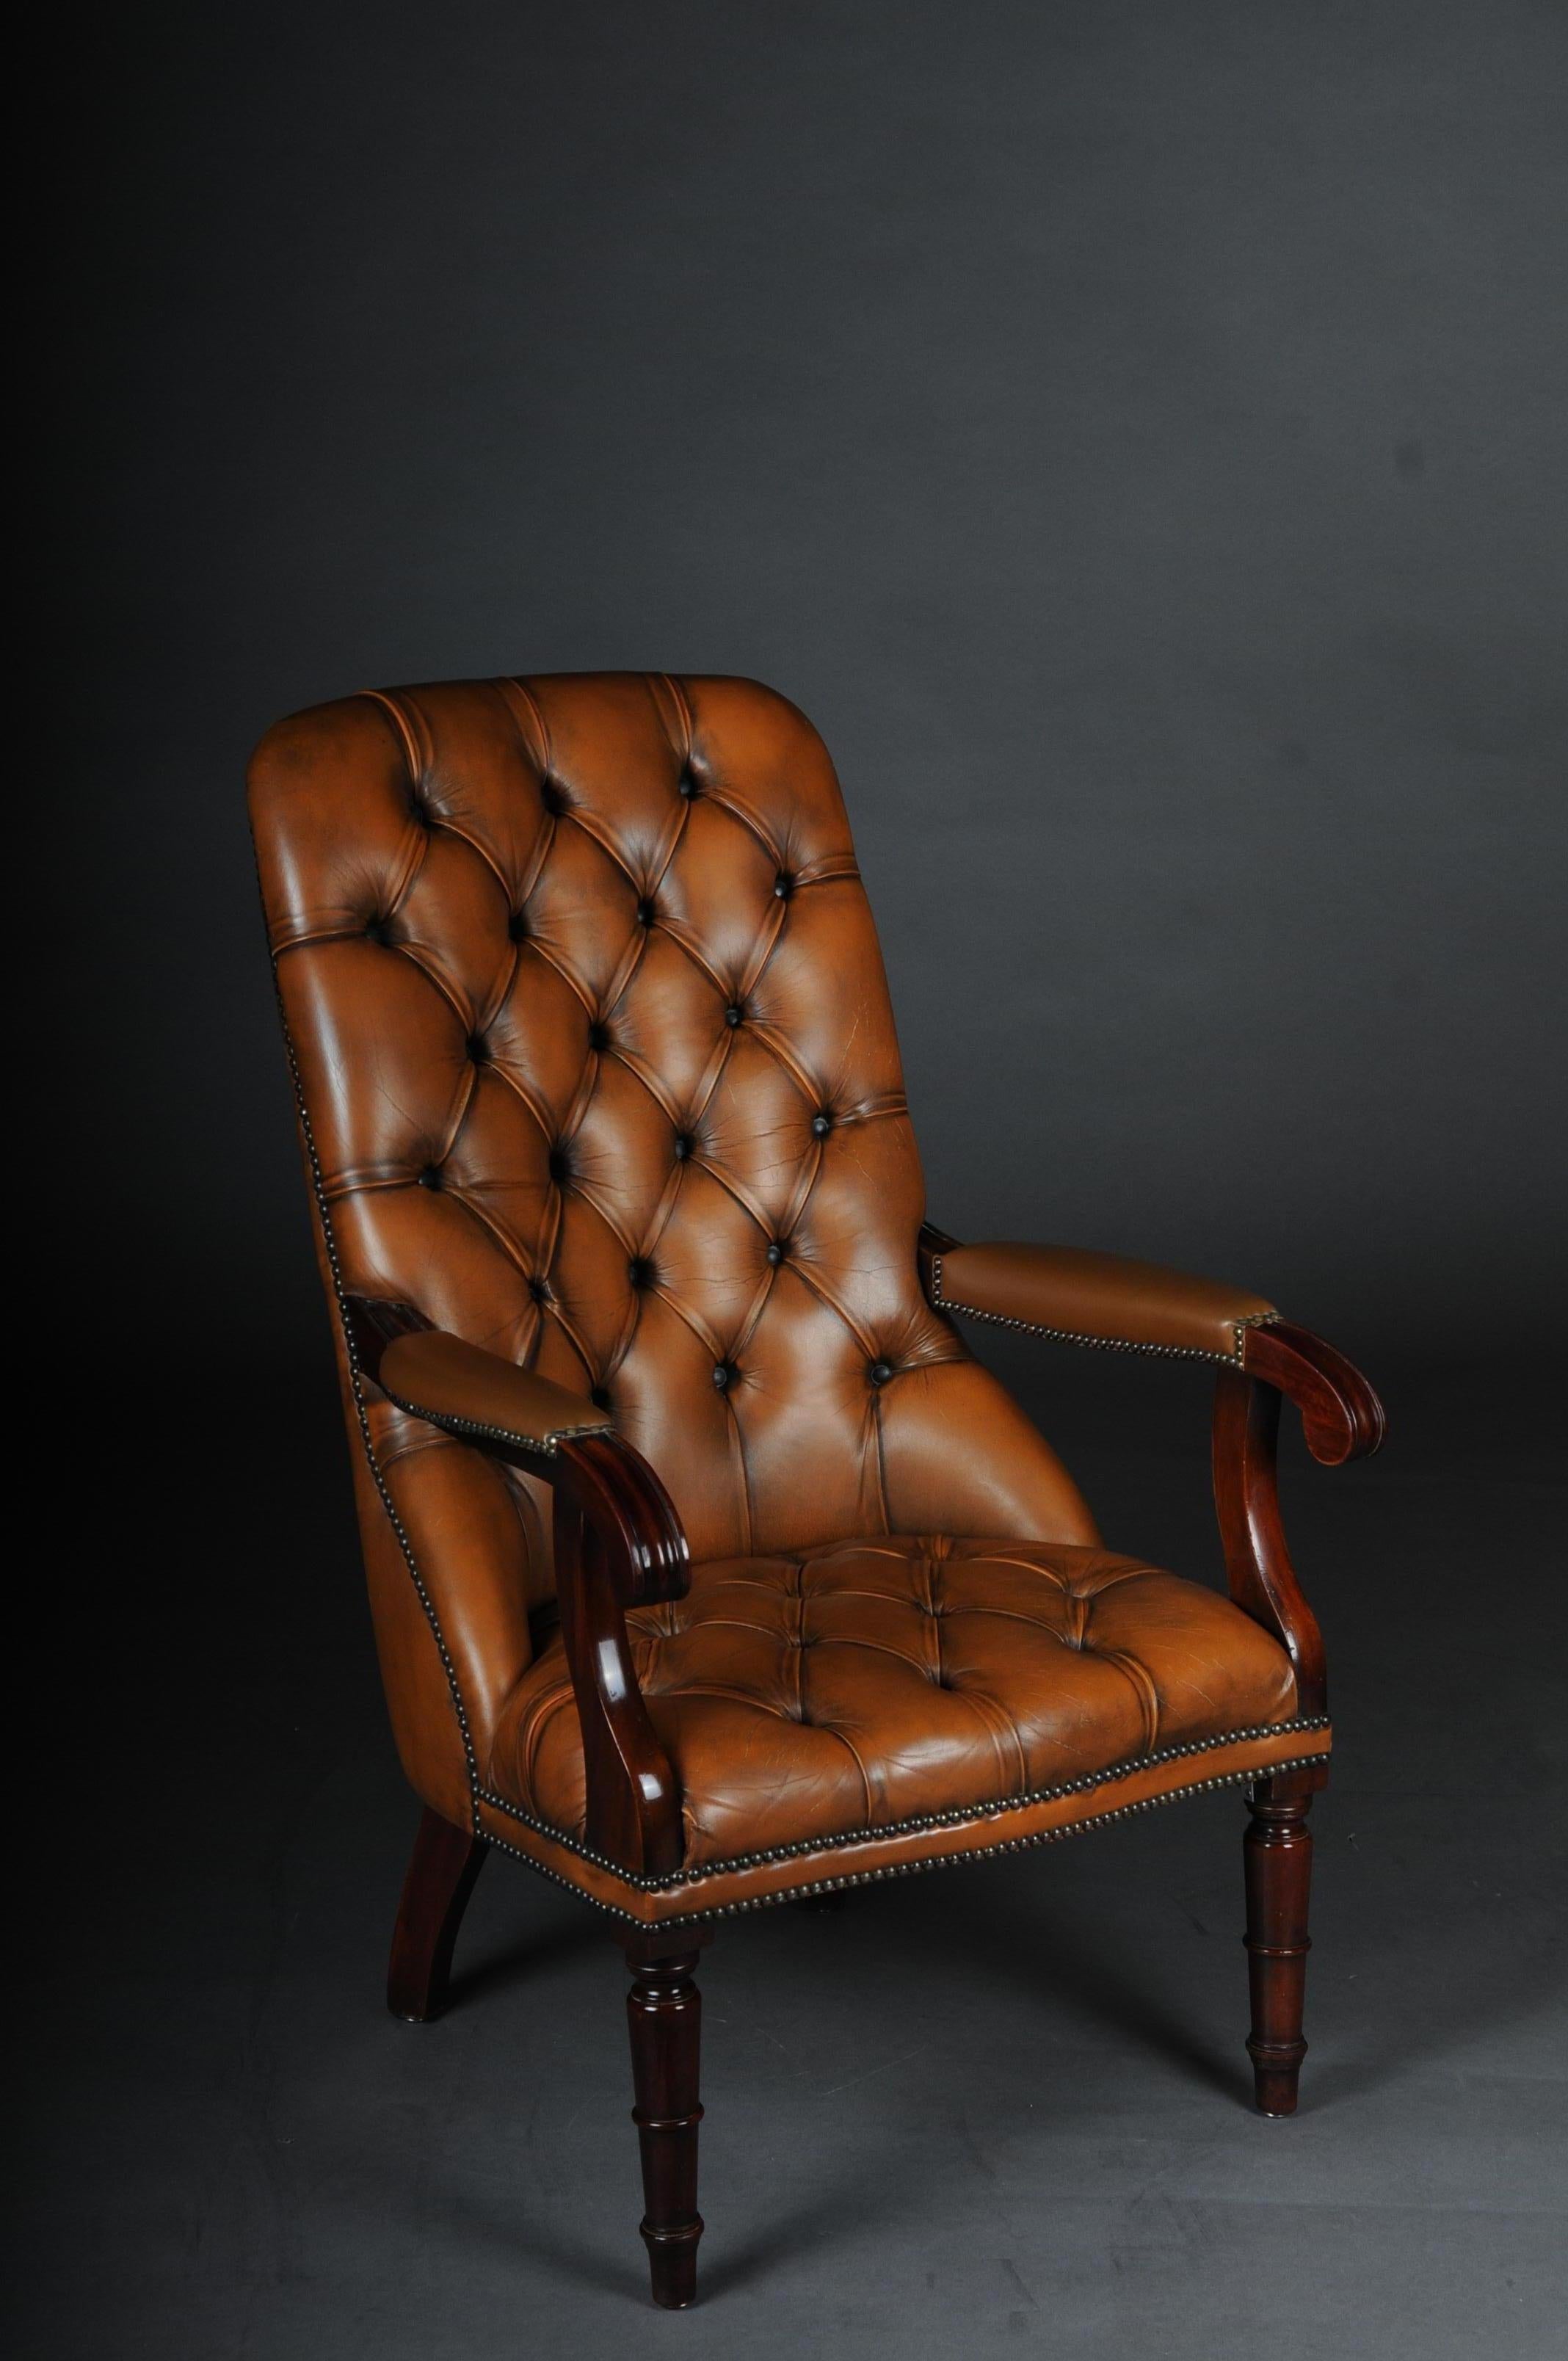 Classic English Chesterfield armchair, leather cognac

Complete upholstery in Chesterfield, cognac. Classic shape and extremely comfortable, 20th century.
Solid mahogany wood.

(B-178).